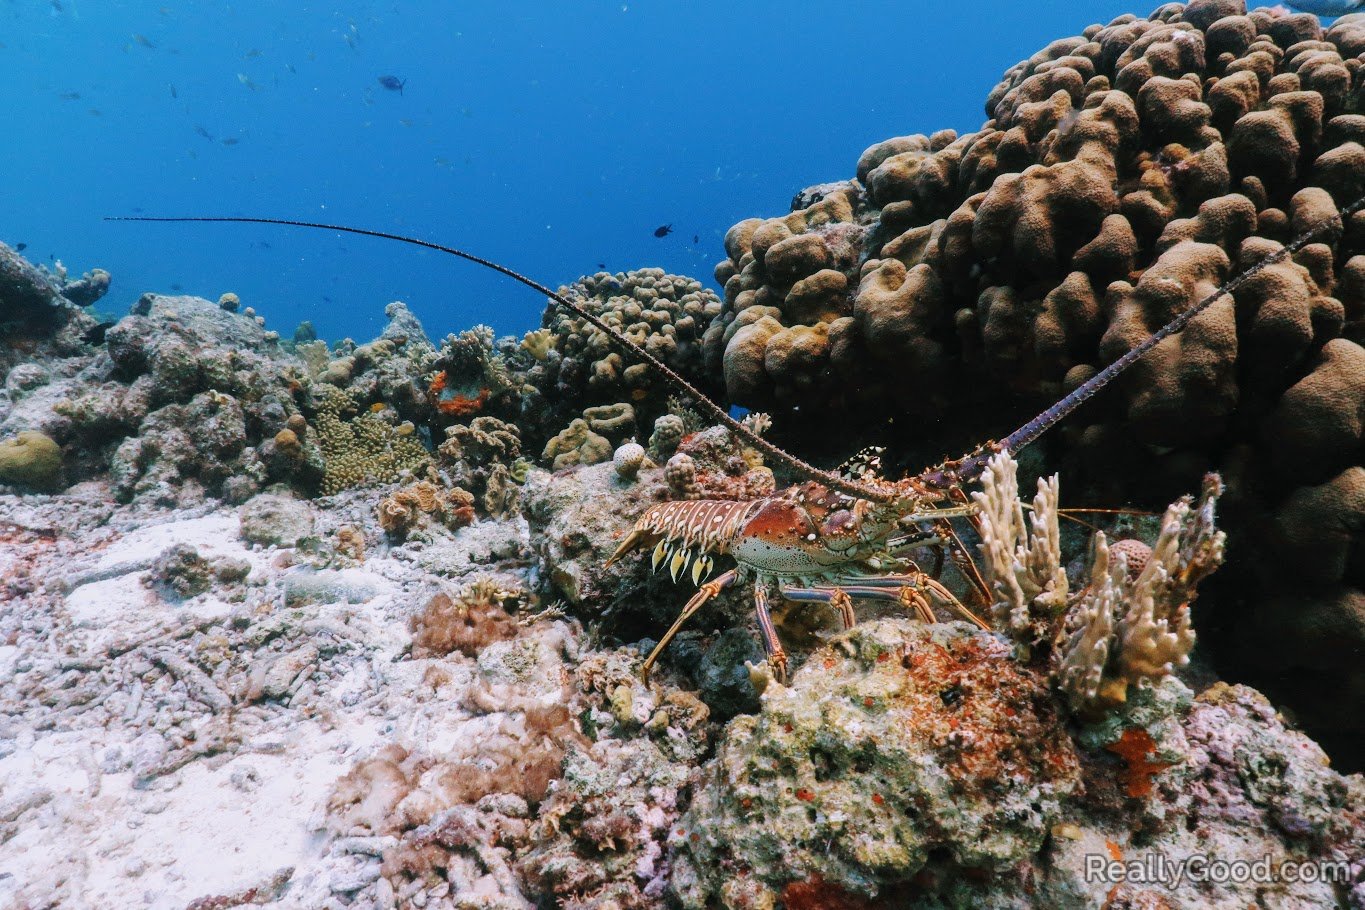 Lobster we saw while snorkeling in Klein Bonaire